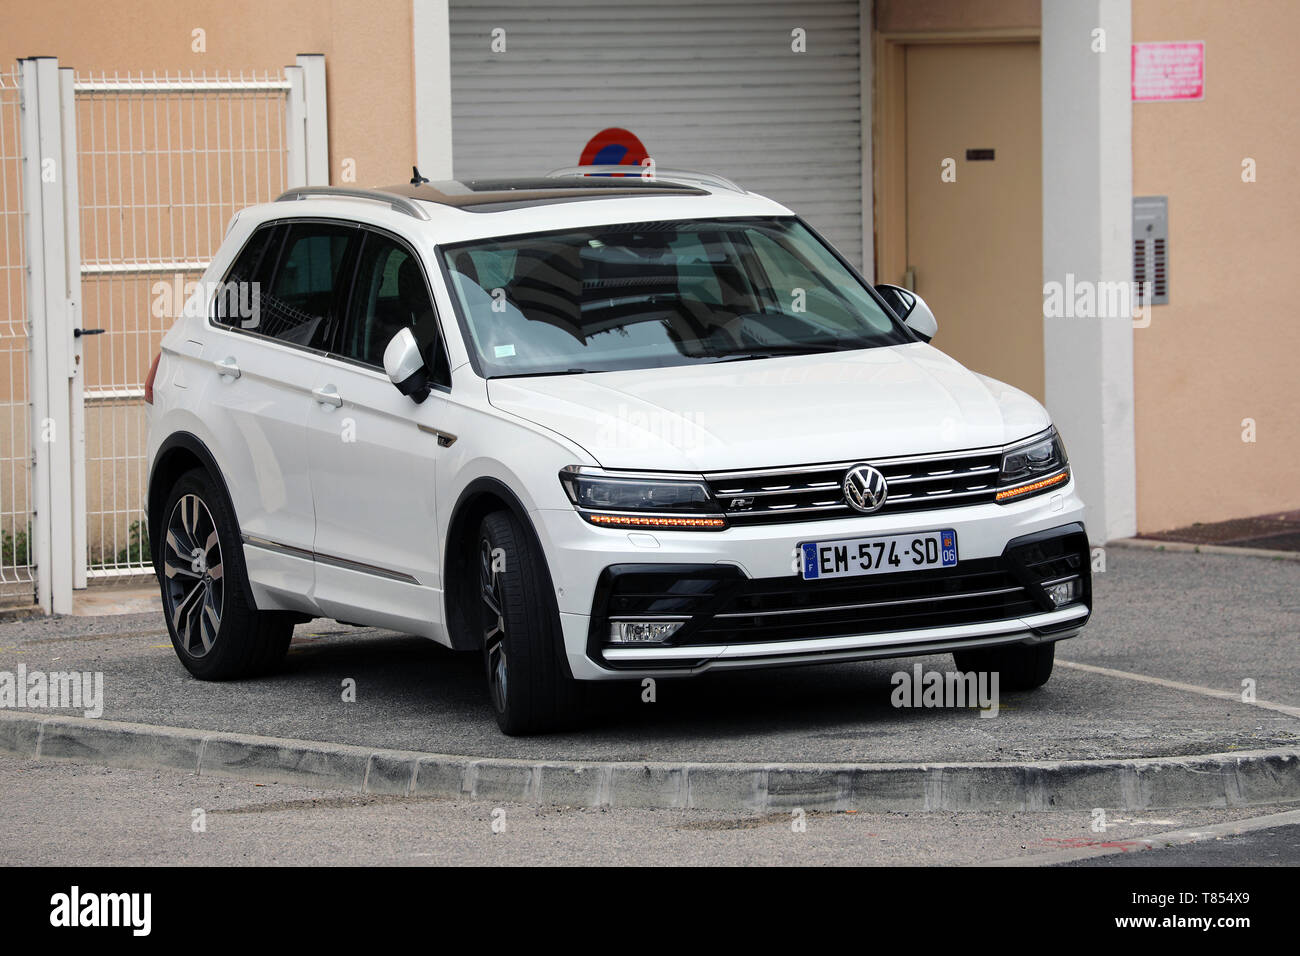 Roquebrune-Cap-Martin, France - May 8, 2019: Luxury White Volkswagen Tiguan 2.0 TDI 240 R-Line SUV Parked In The Street, Compact Crossover Vehicle (CU Stock Photo